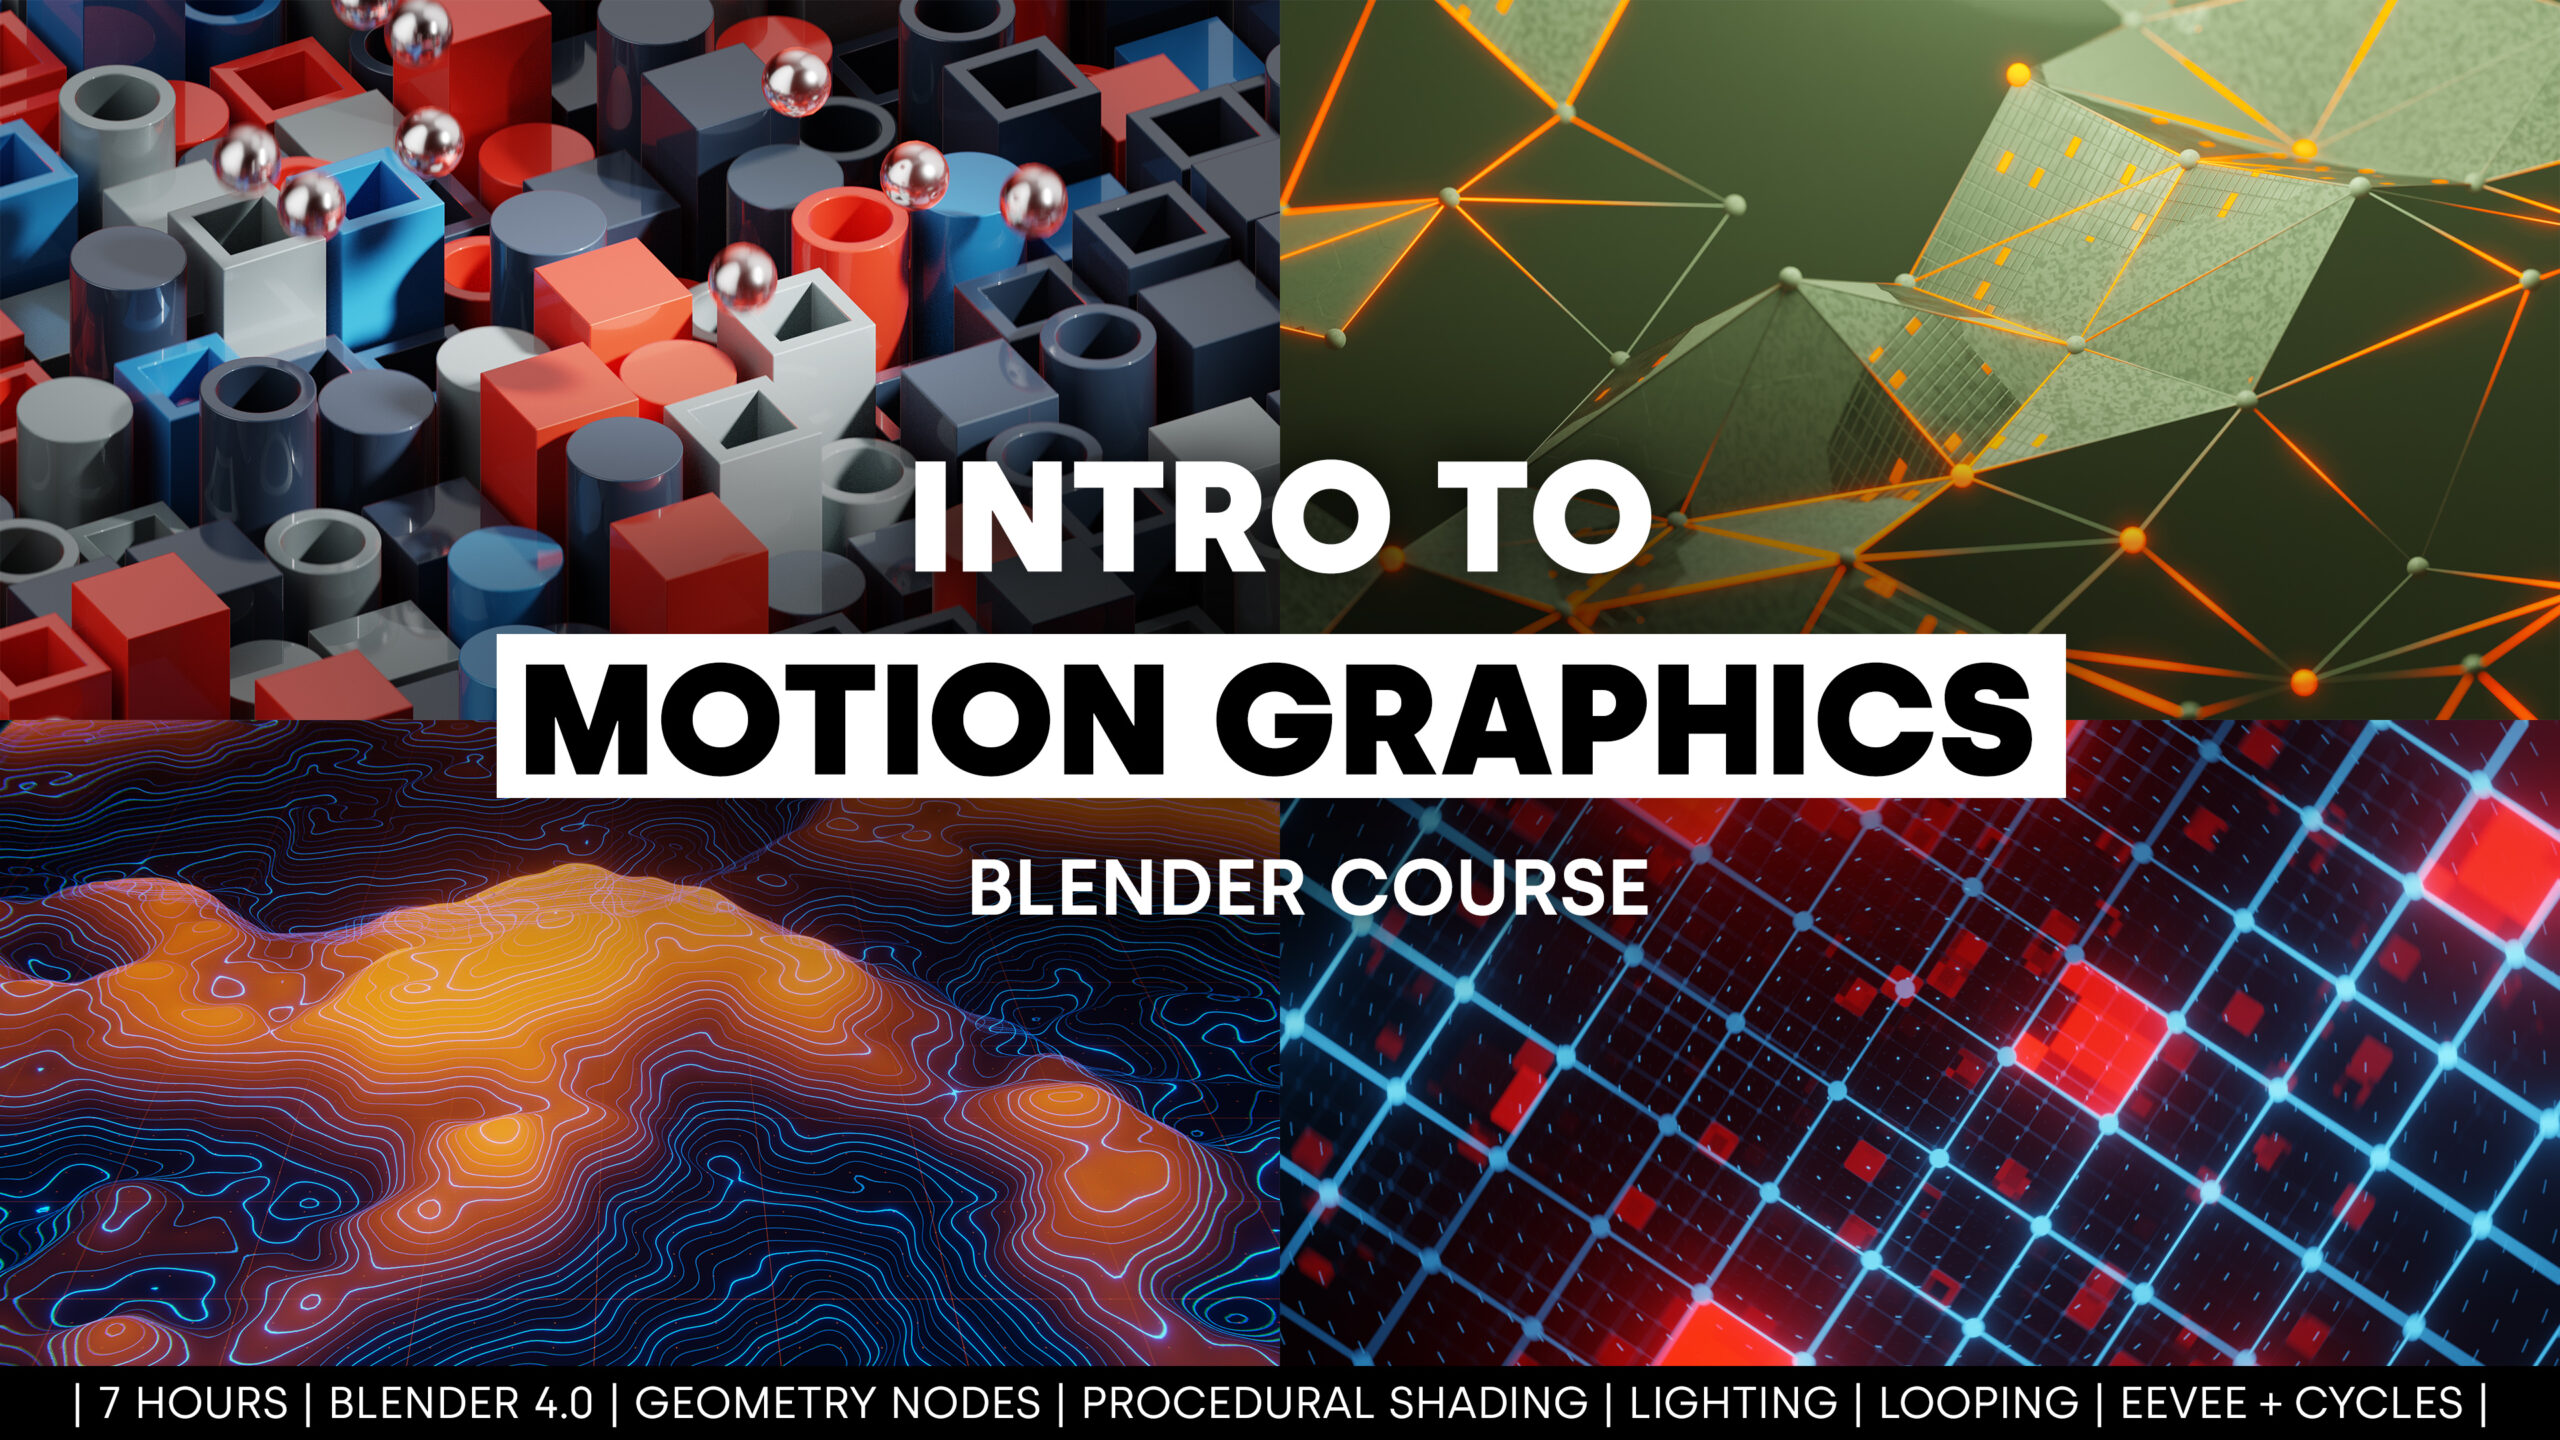 Intro To Motion Graphics (Blender Course)